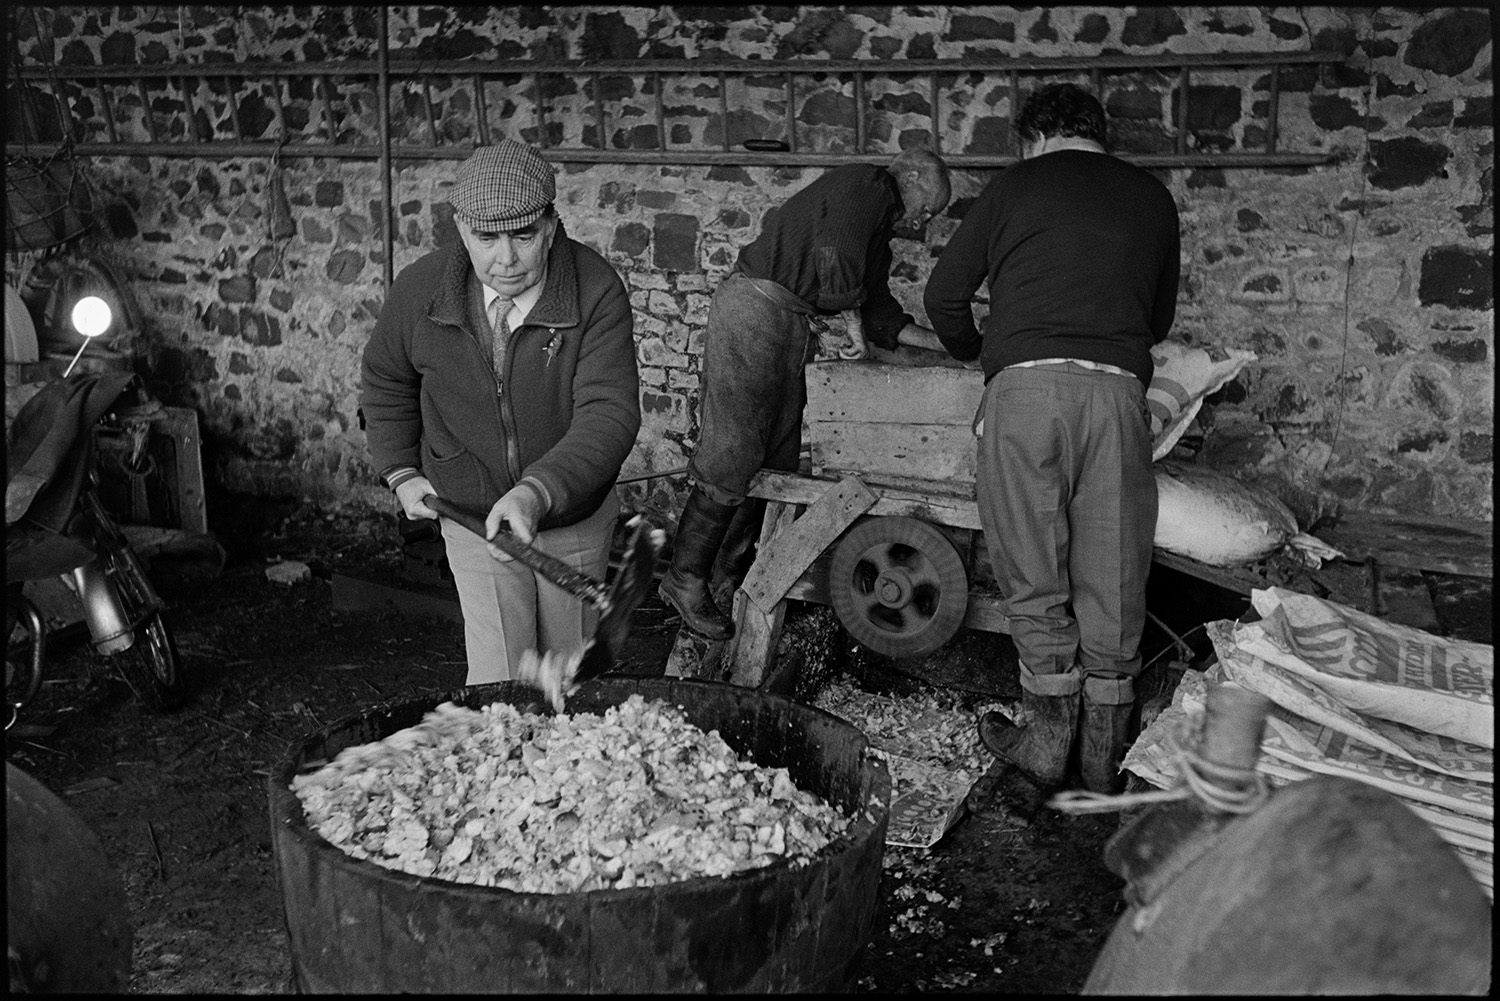 Cider making, apple crusher and cider press. 
[Bill Hammond and another man pulping apples for cider making using an apple crusher at the back of a barn at Rashleigh Mill, Bridge Reeve. Another man is shovelling the pulp into a barrel in the foreground.]